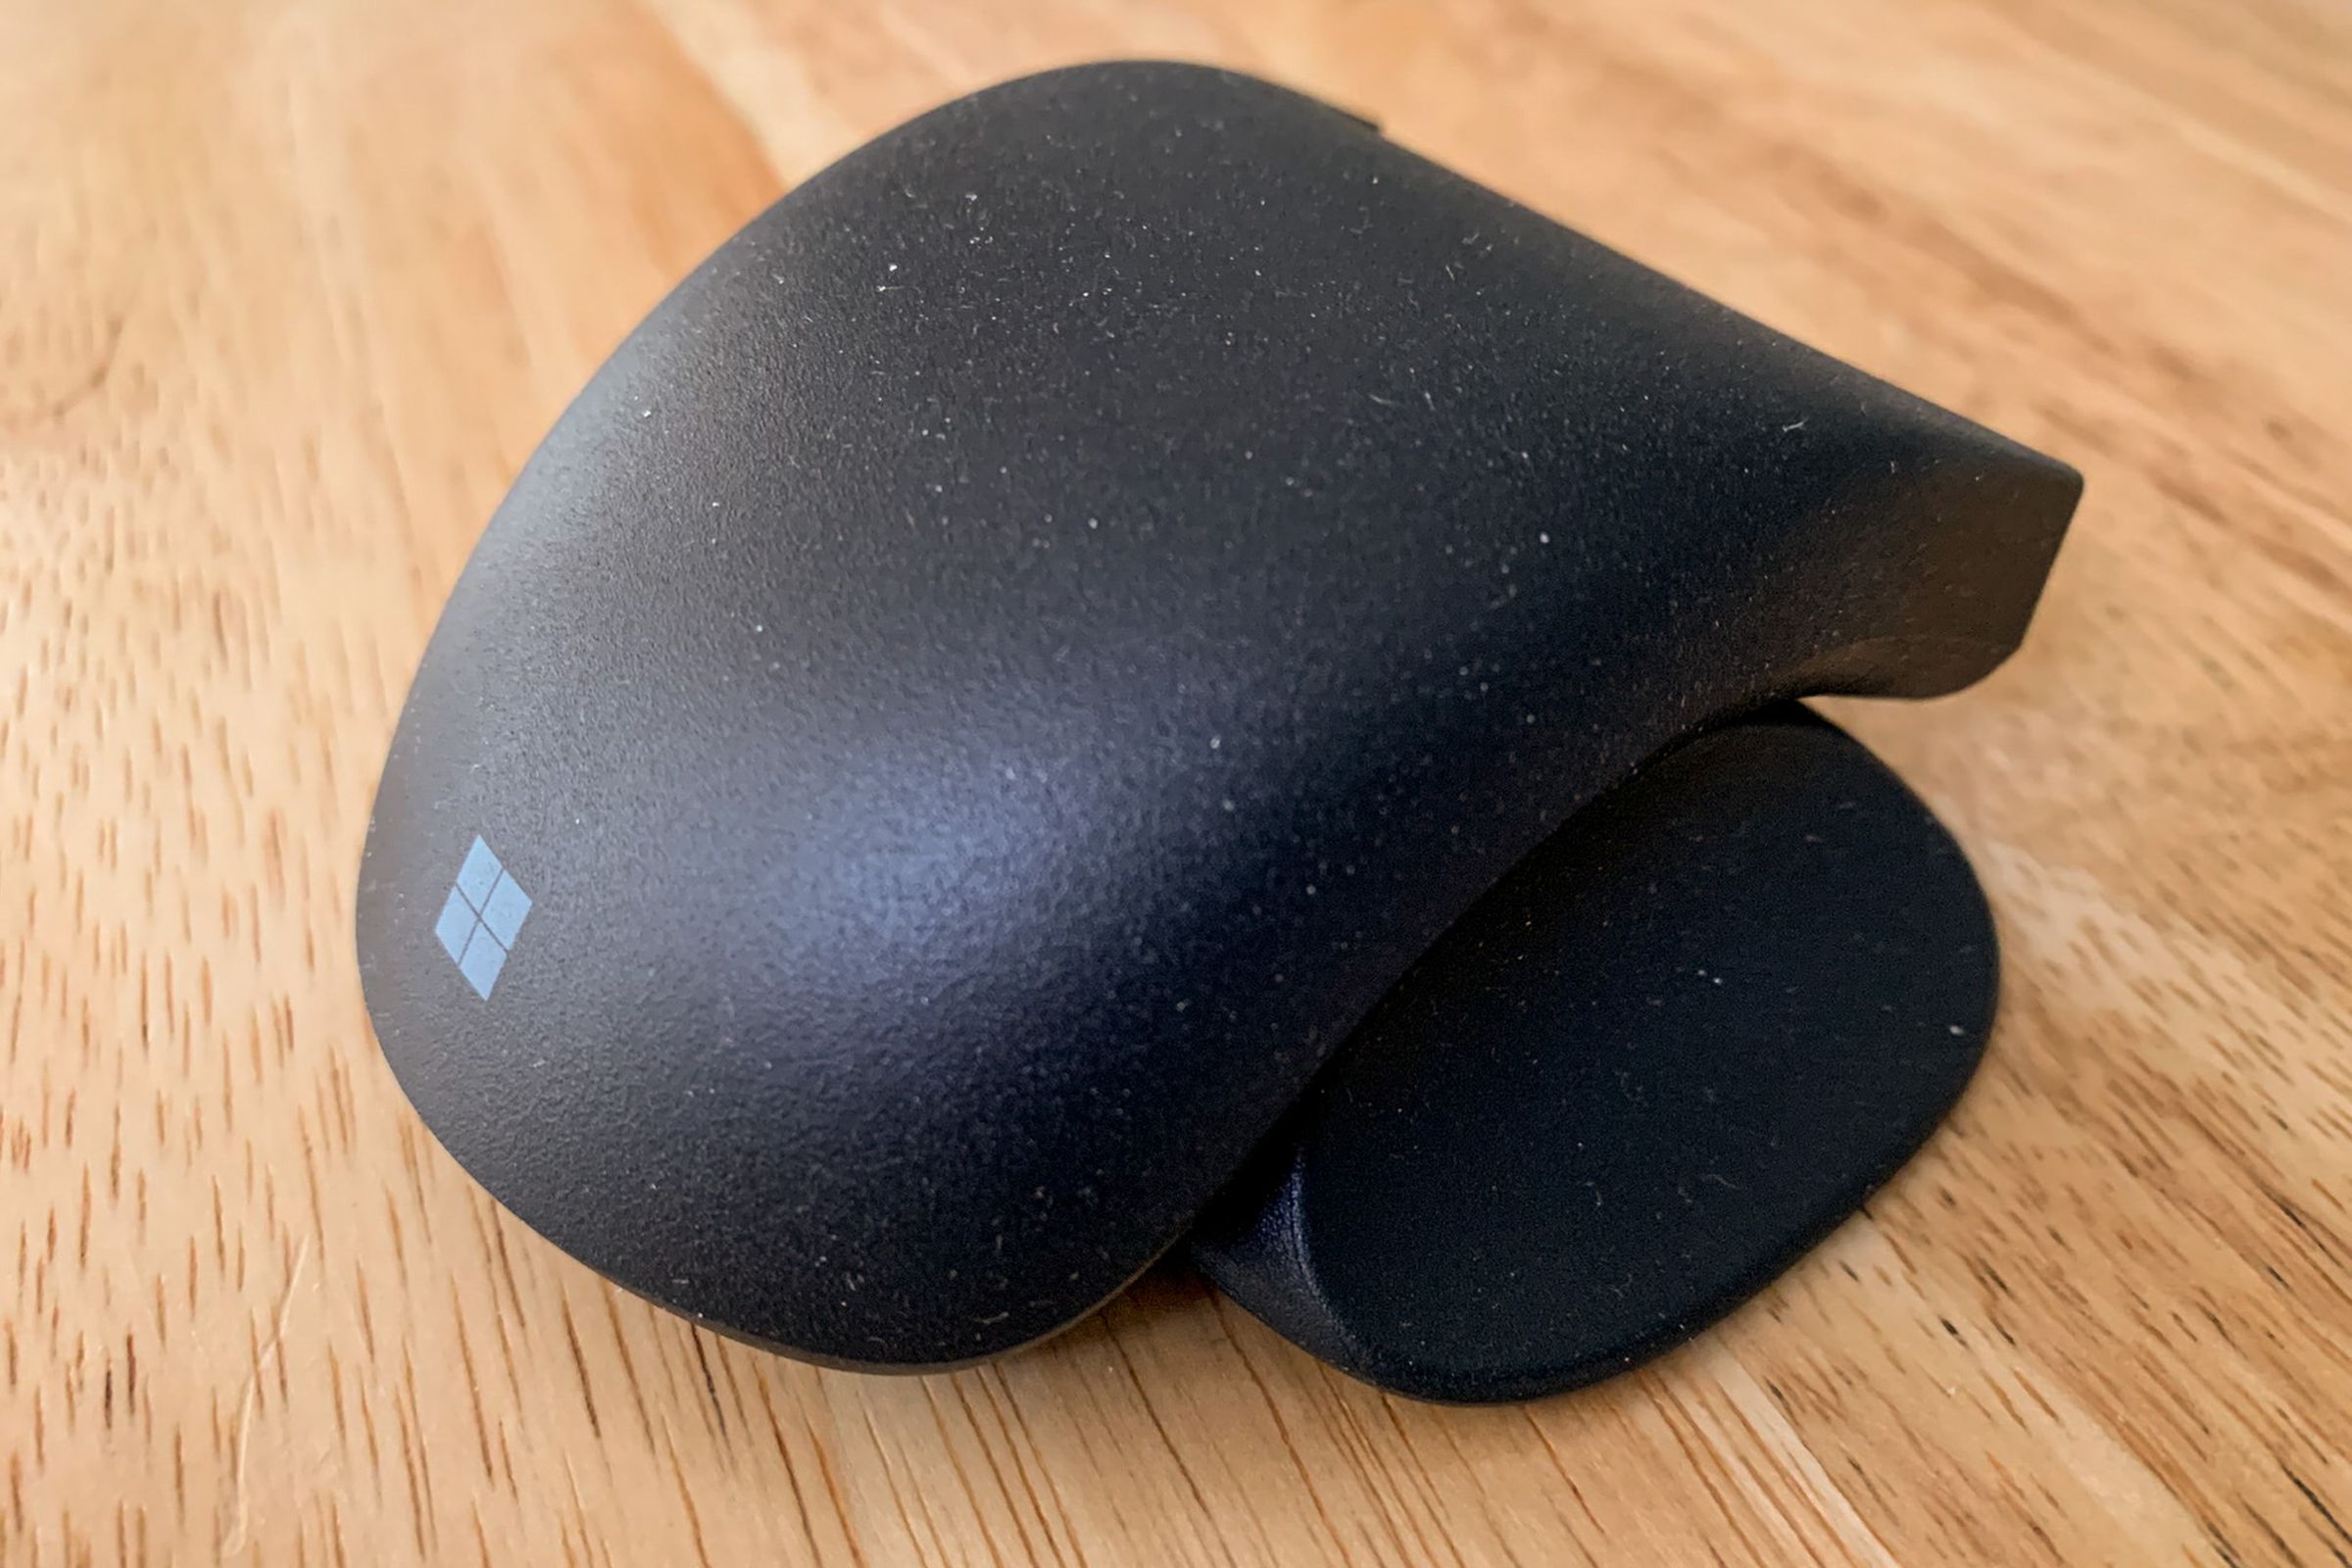 Close-up of black adaptive mouse with thumb rest.